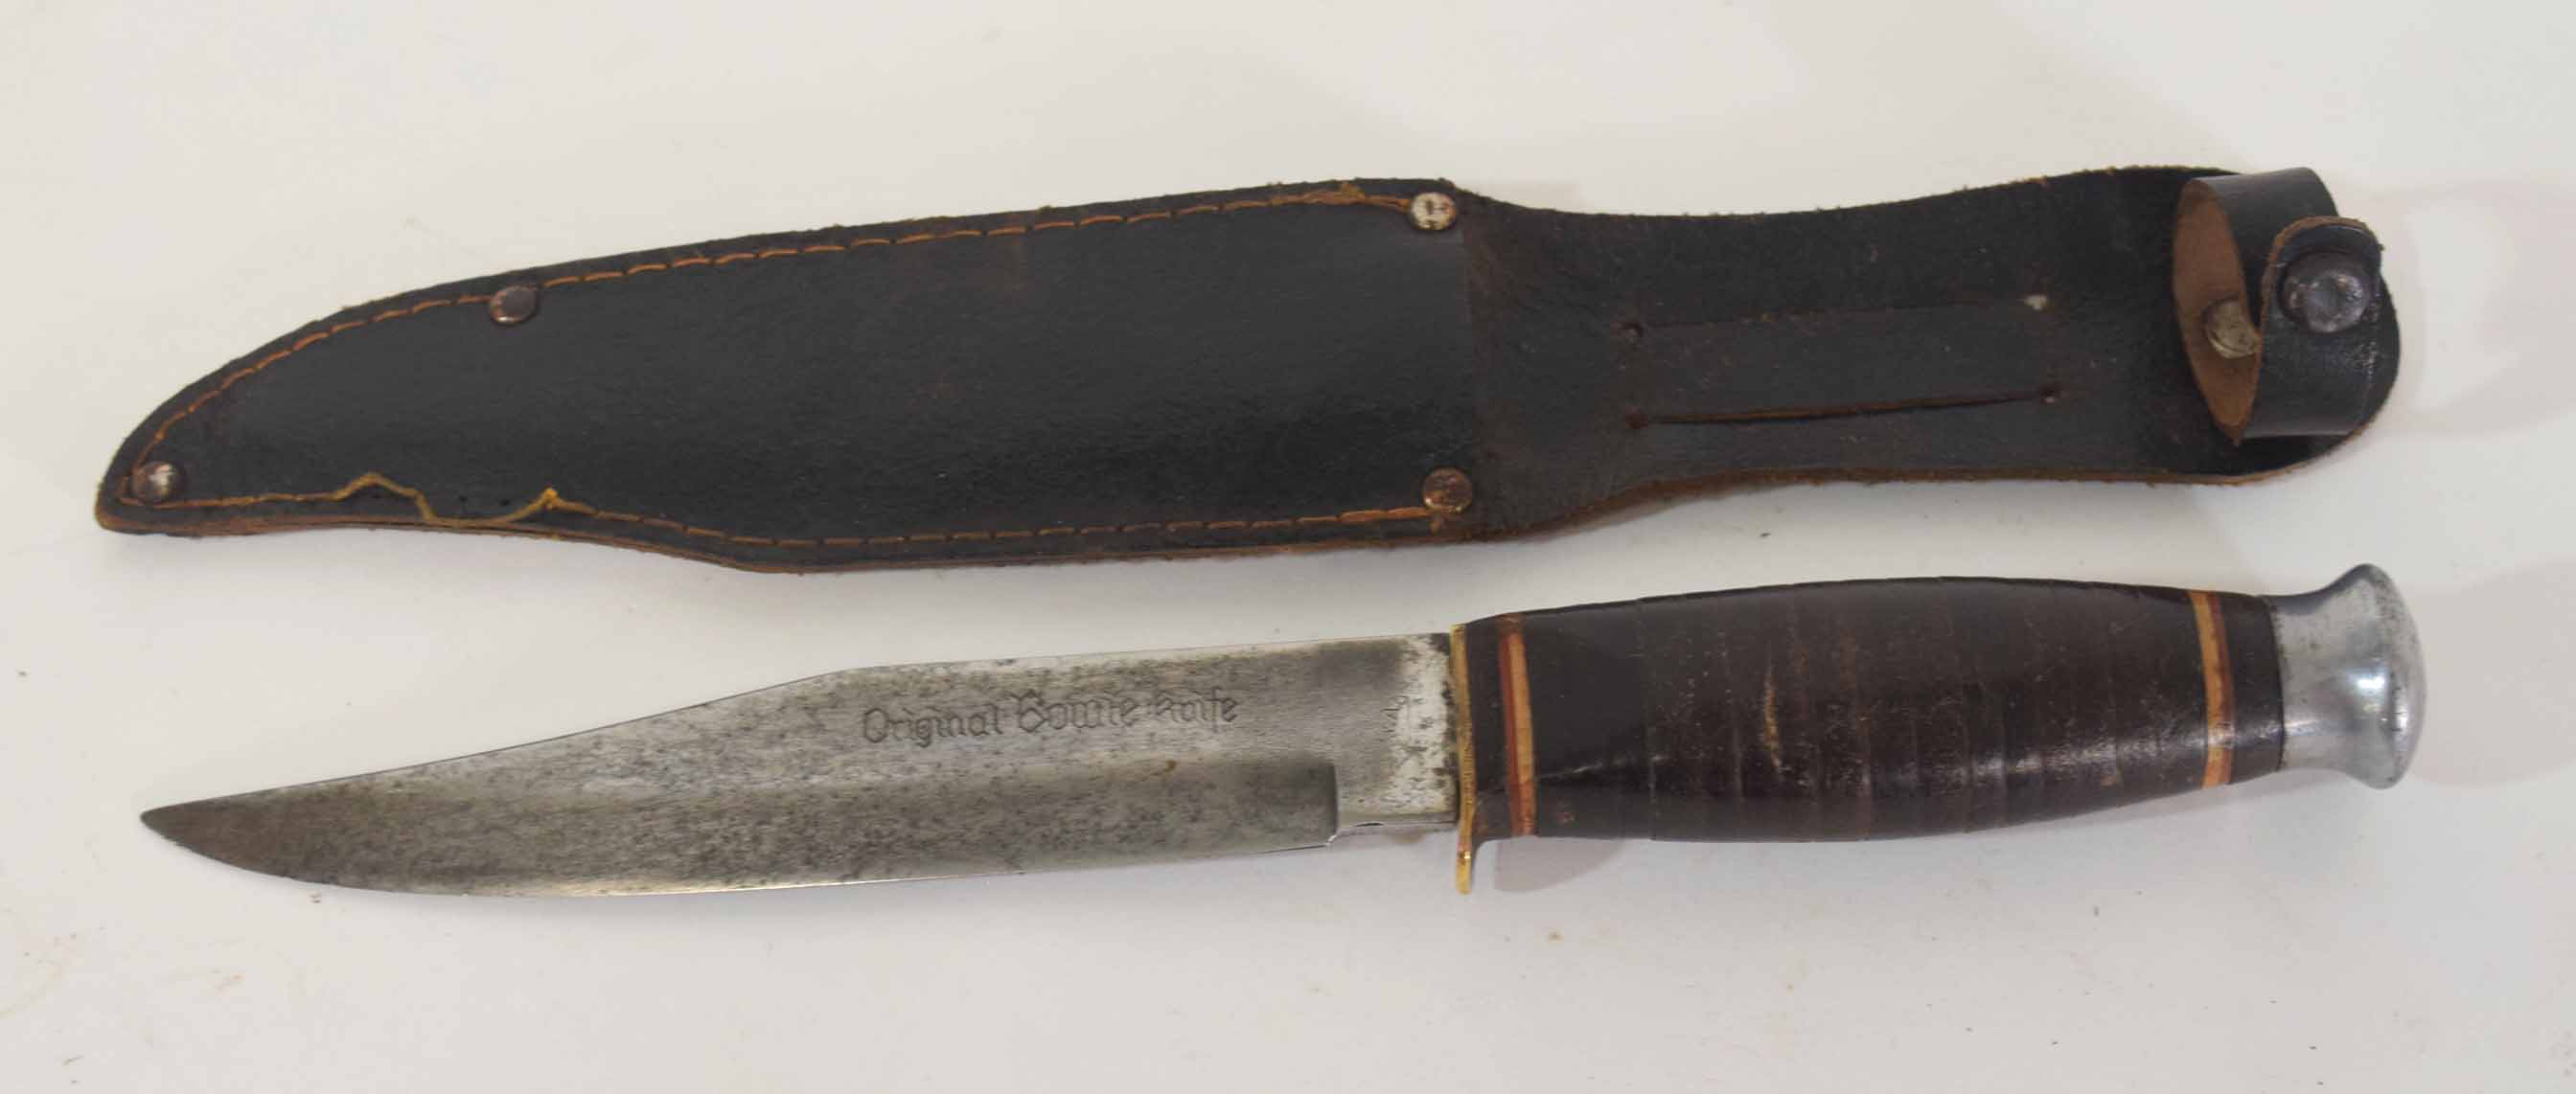 Bowie knife by Solar, blade inscribed "Original Bowie Knife", the steel blade above guard and - Image 2 of 2